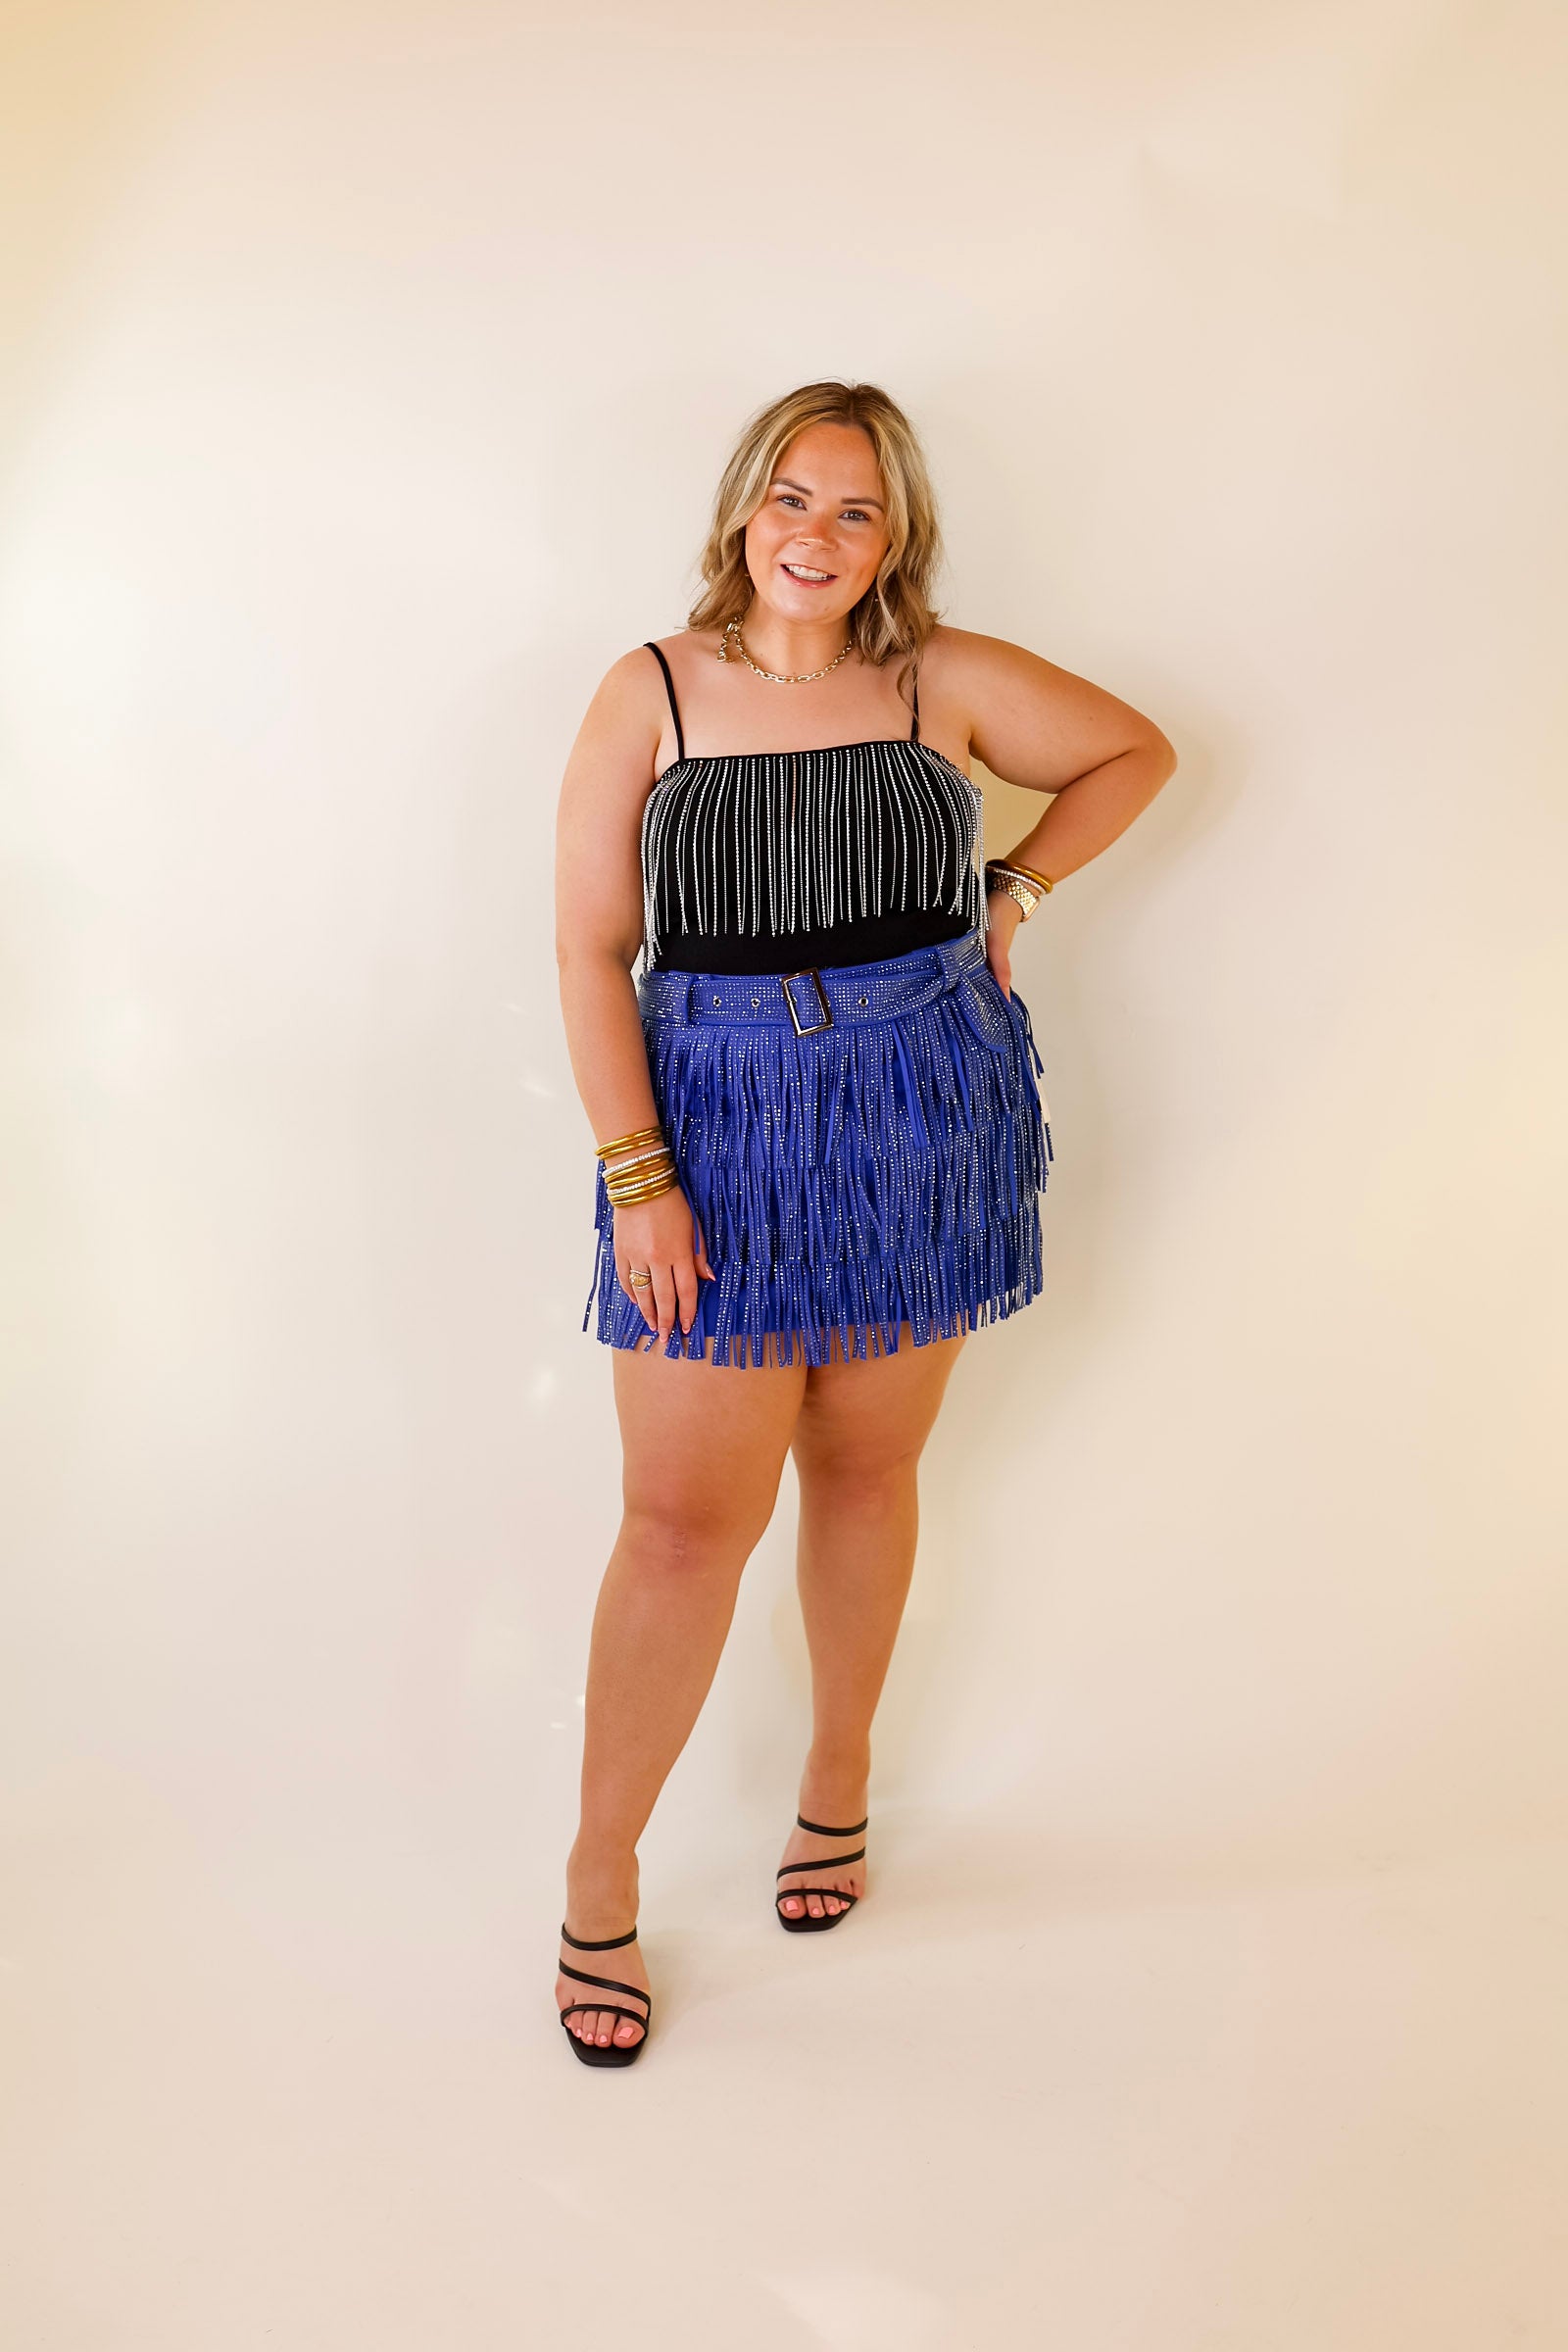 It Crowd Spaghetti Strap Top with Crystal Fringe in Black - Giddy Up Glamour Boutique